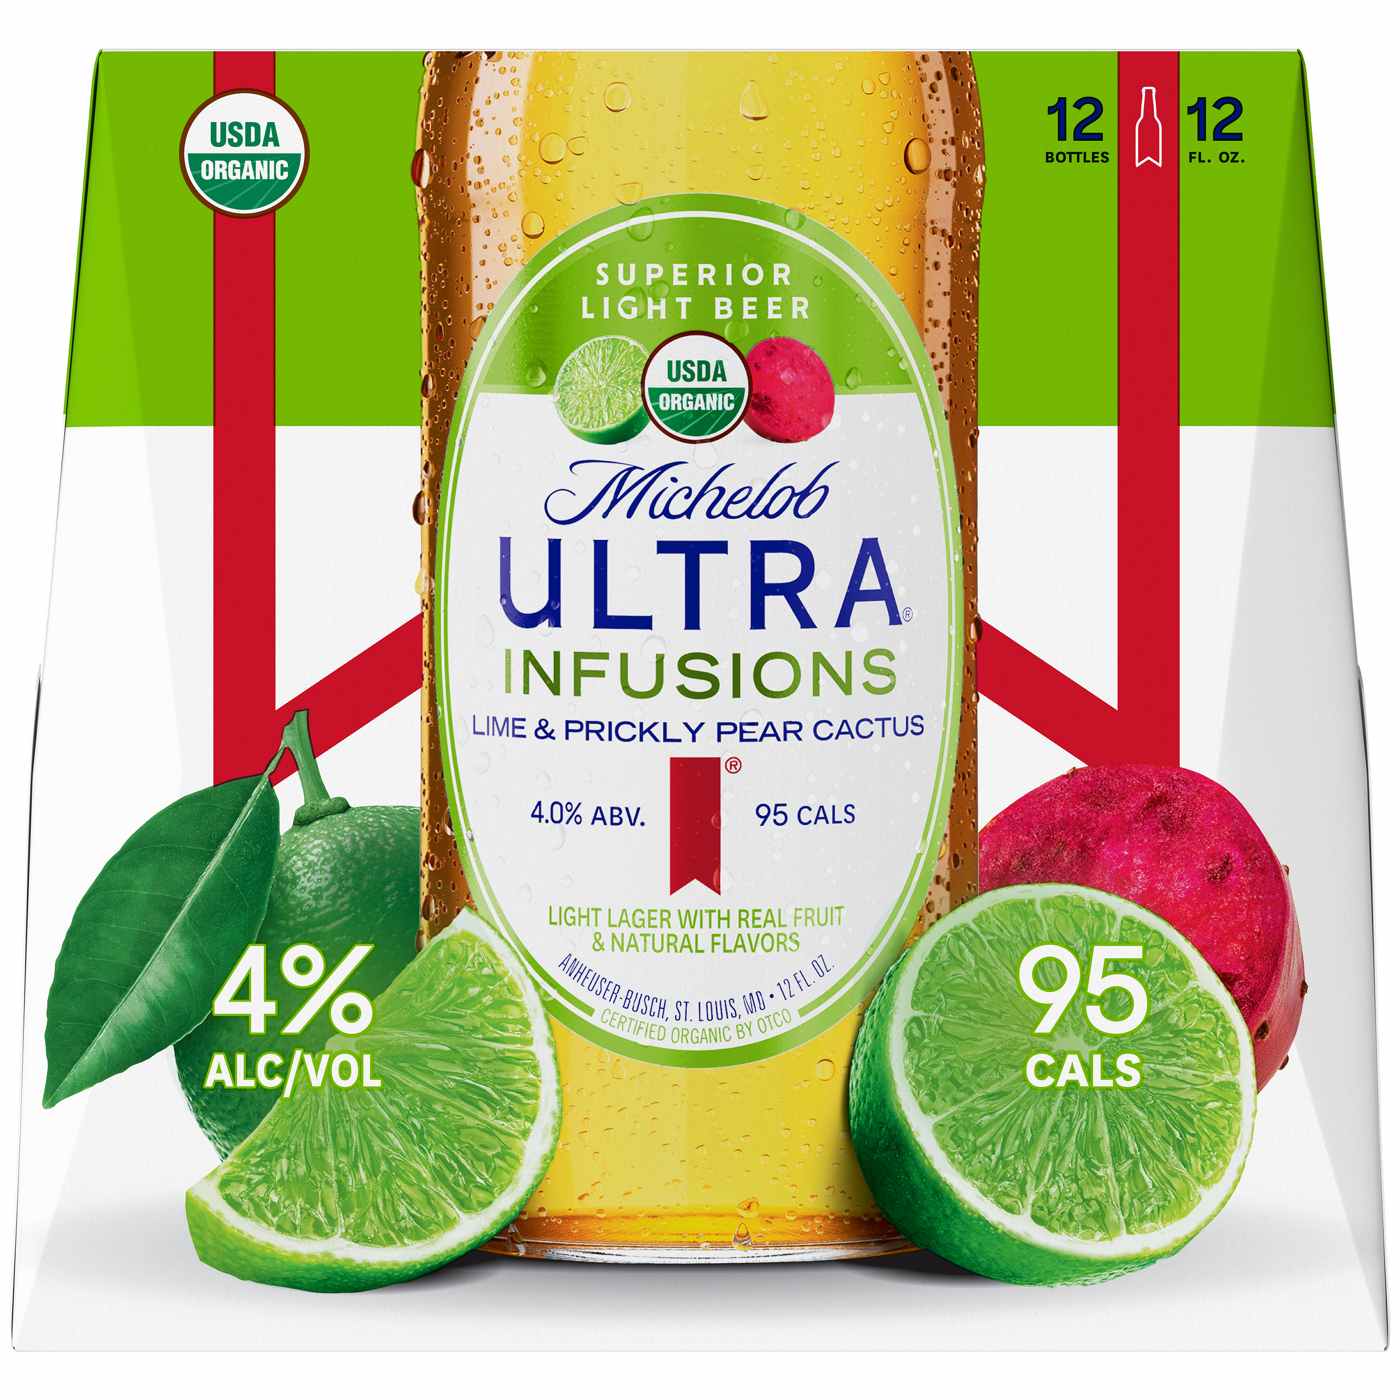 Michelob Ultra Infusions Lime & Prickly Pear Cactus Light Beer 12 pk Bottles; image 2 of 2